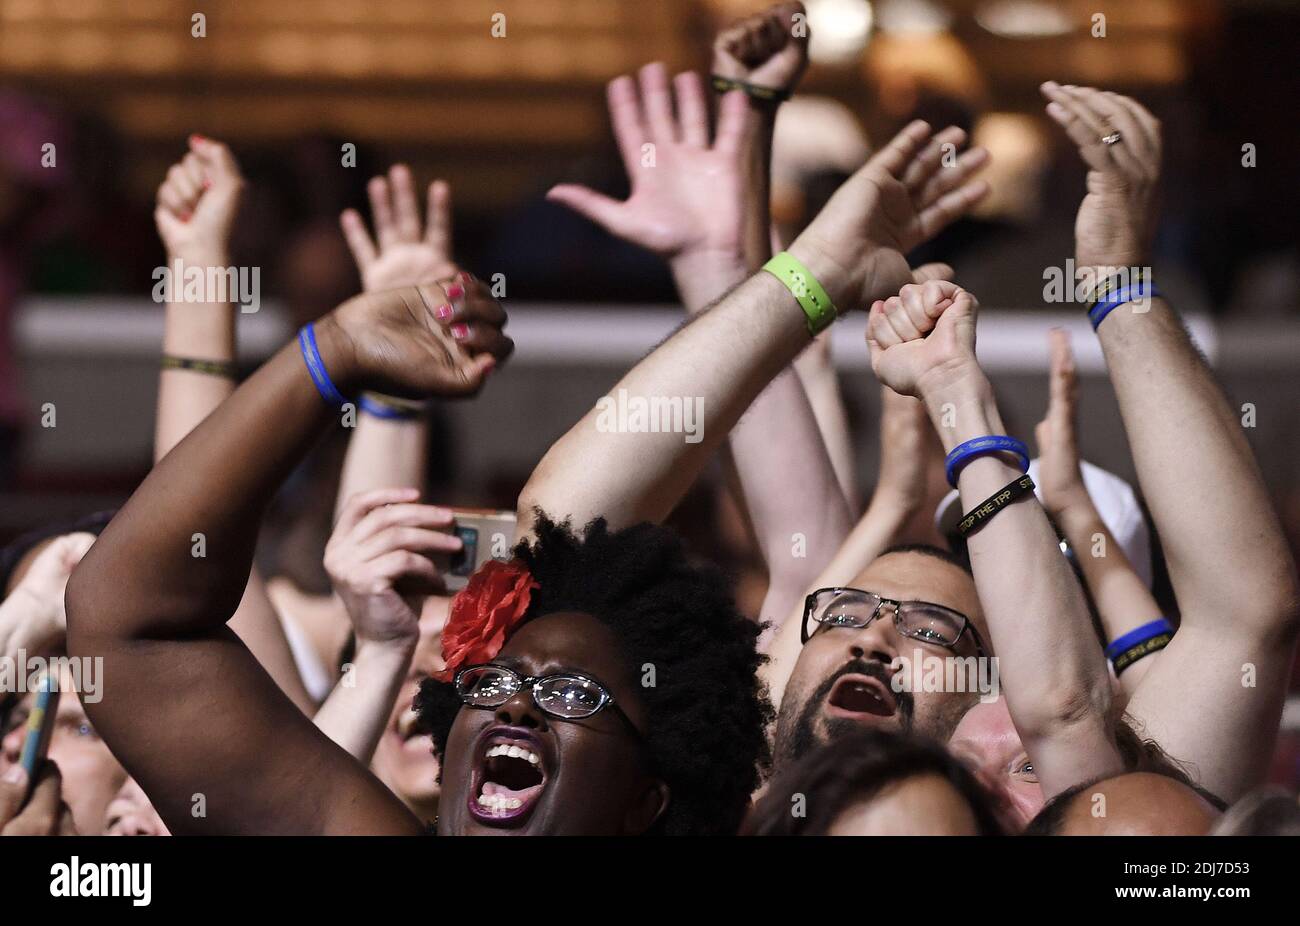 Delegates cheer during the Roll Call vote on the second day of the Democratic National Convention on July 26, 2016 at the Wells Fargo Center, Philadelphia, Pennsylvania,Photo by Olivier Douliery/Abacapress.com Stock Photo